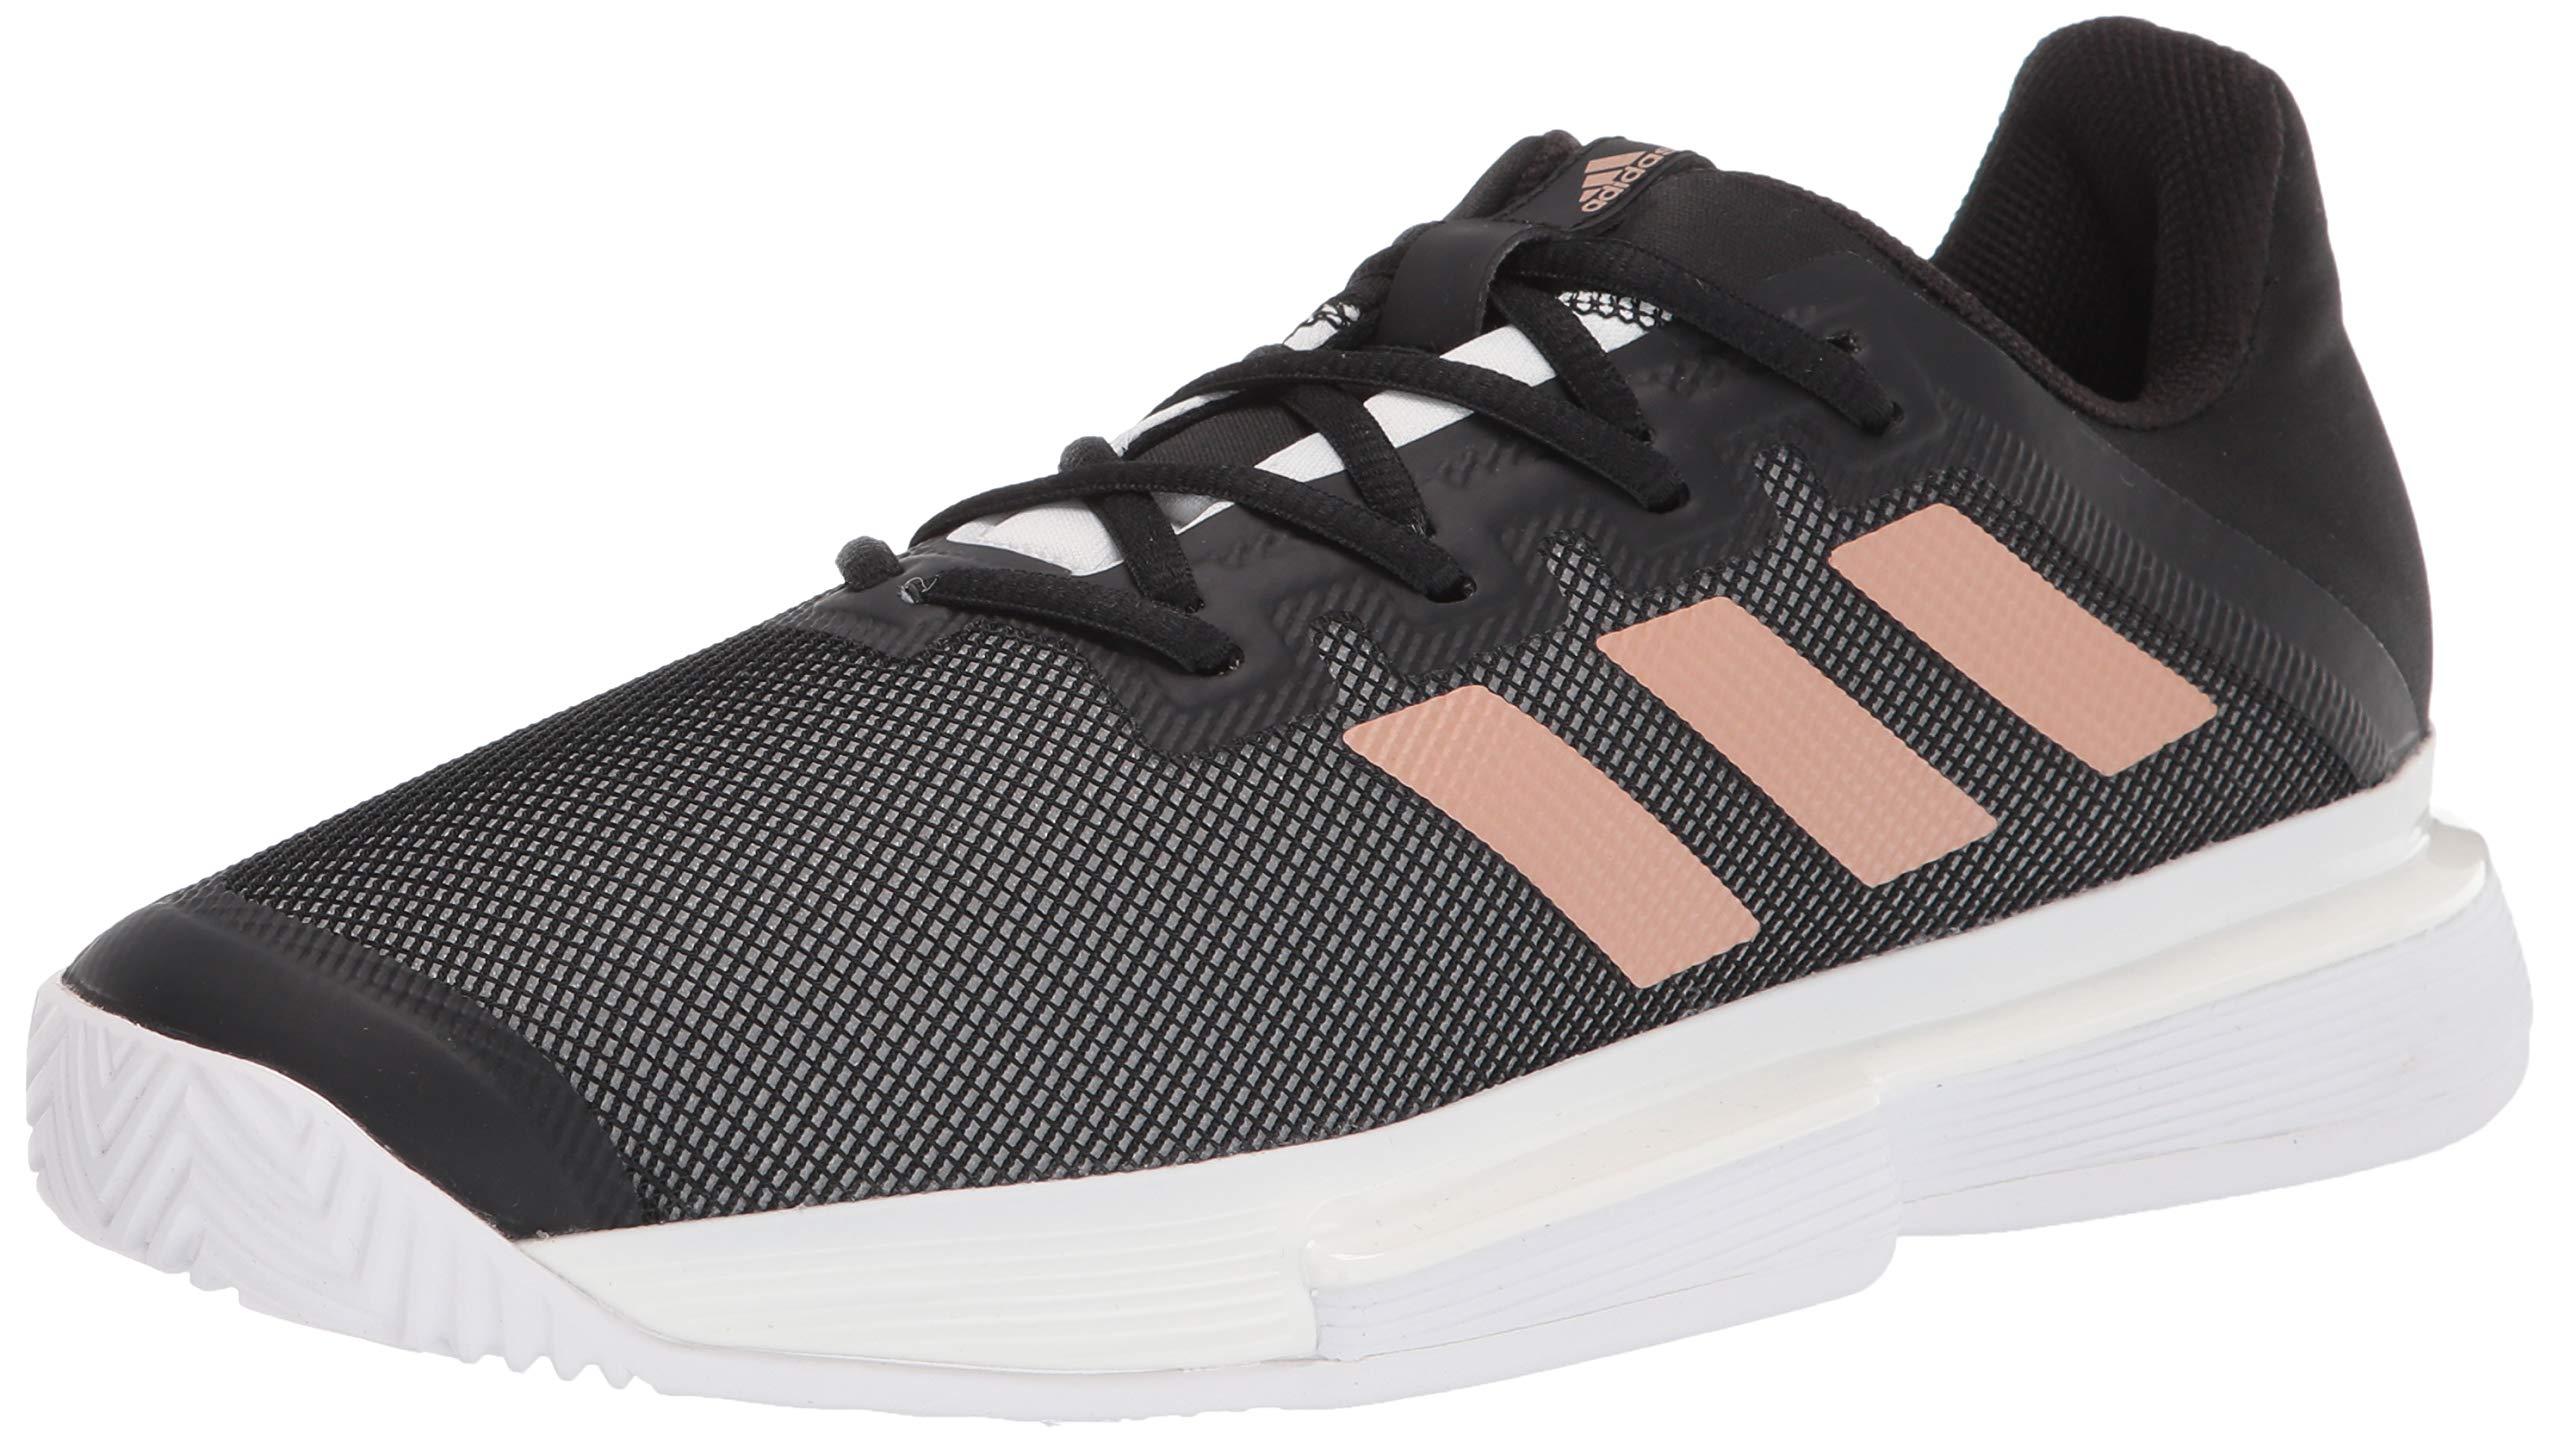 adidas Solematch Bounce Tennis Shoe in Black/Copper/White (Black) - Save  58% | Lyst